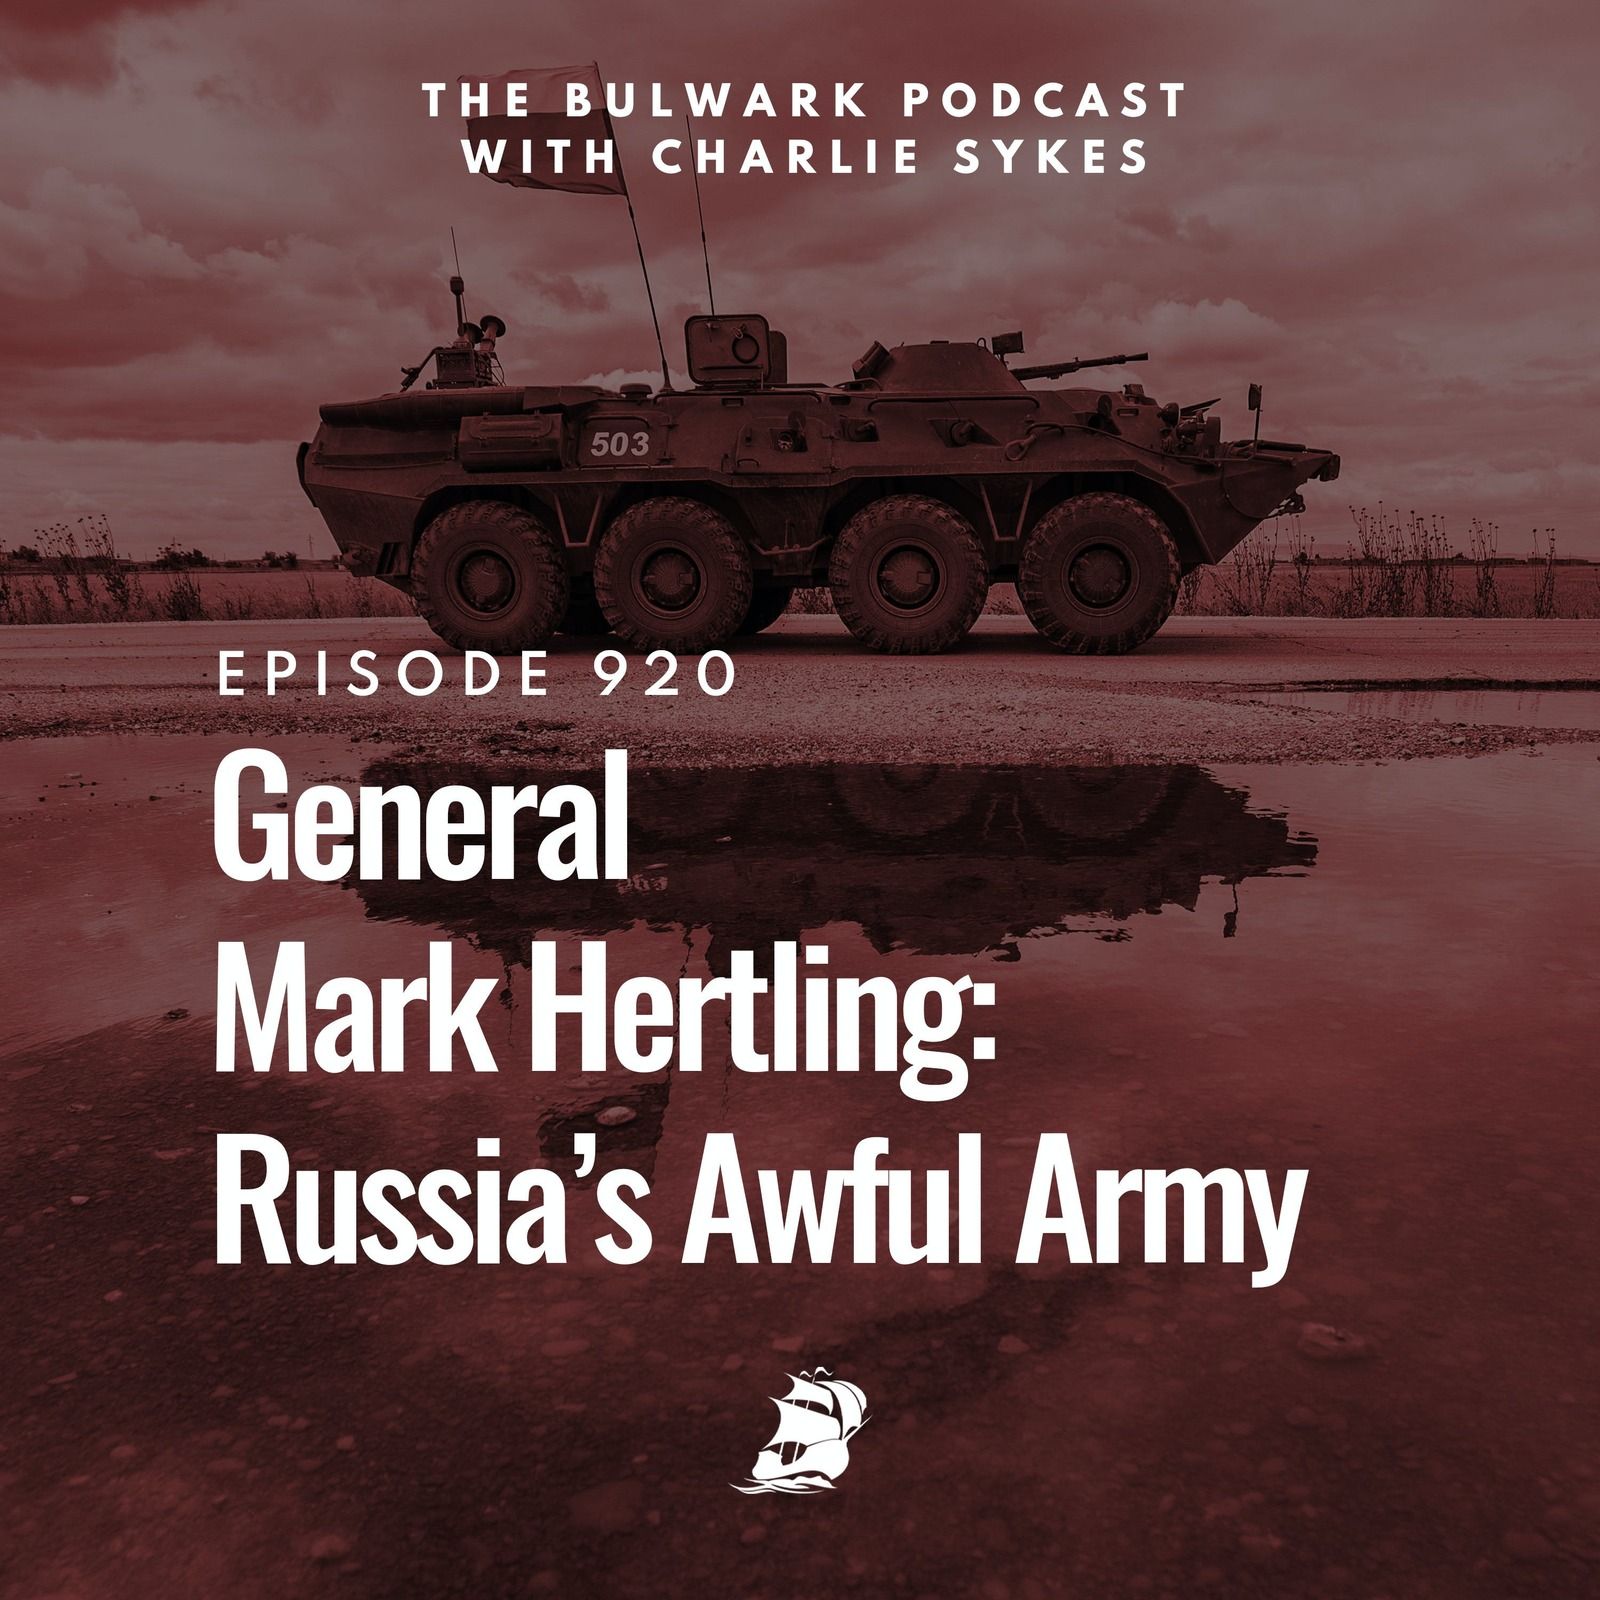 General Mark Hertling: Russia’s Awful Army by The Bulwark Podcast